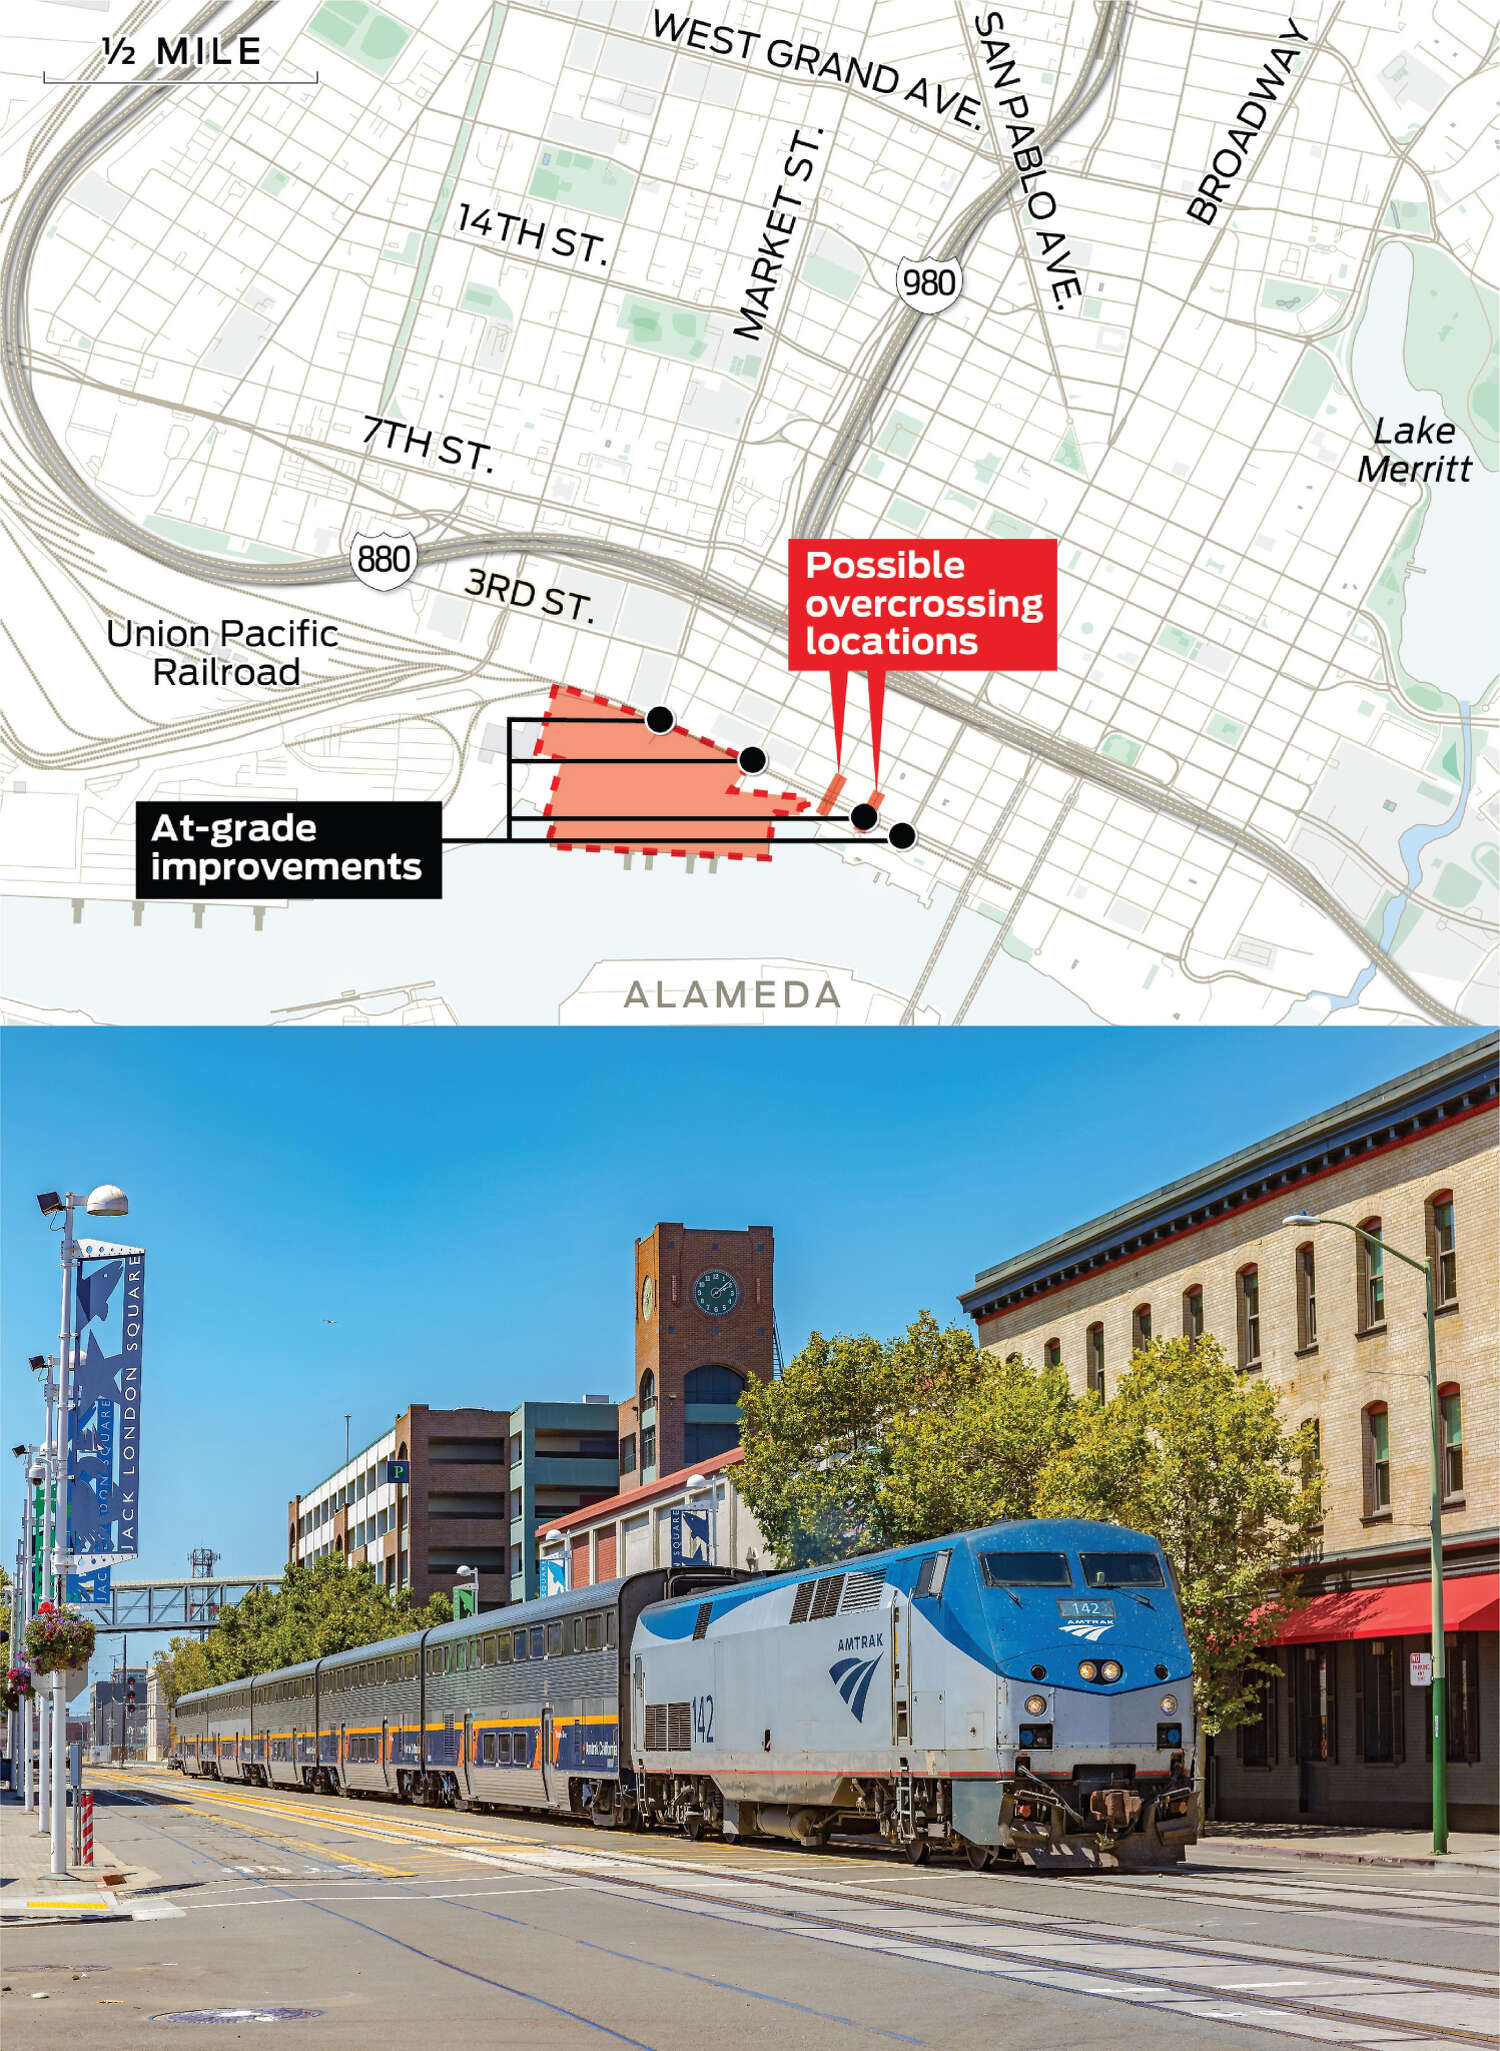 The crossing of Jefferson and Clay streets with the railroad tracks is highlighted as a potential pedestrian and bicycle overcrossing. Intersections between the railroad and Market Street, Martin Luther King Jr Way, Clay Street, Washington Street and Broadway are plotted. A photo of an Amtrak train near Jack London Square is shown.